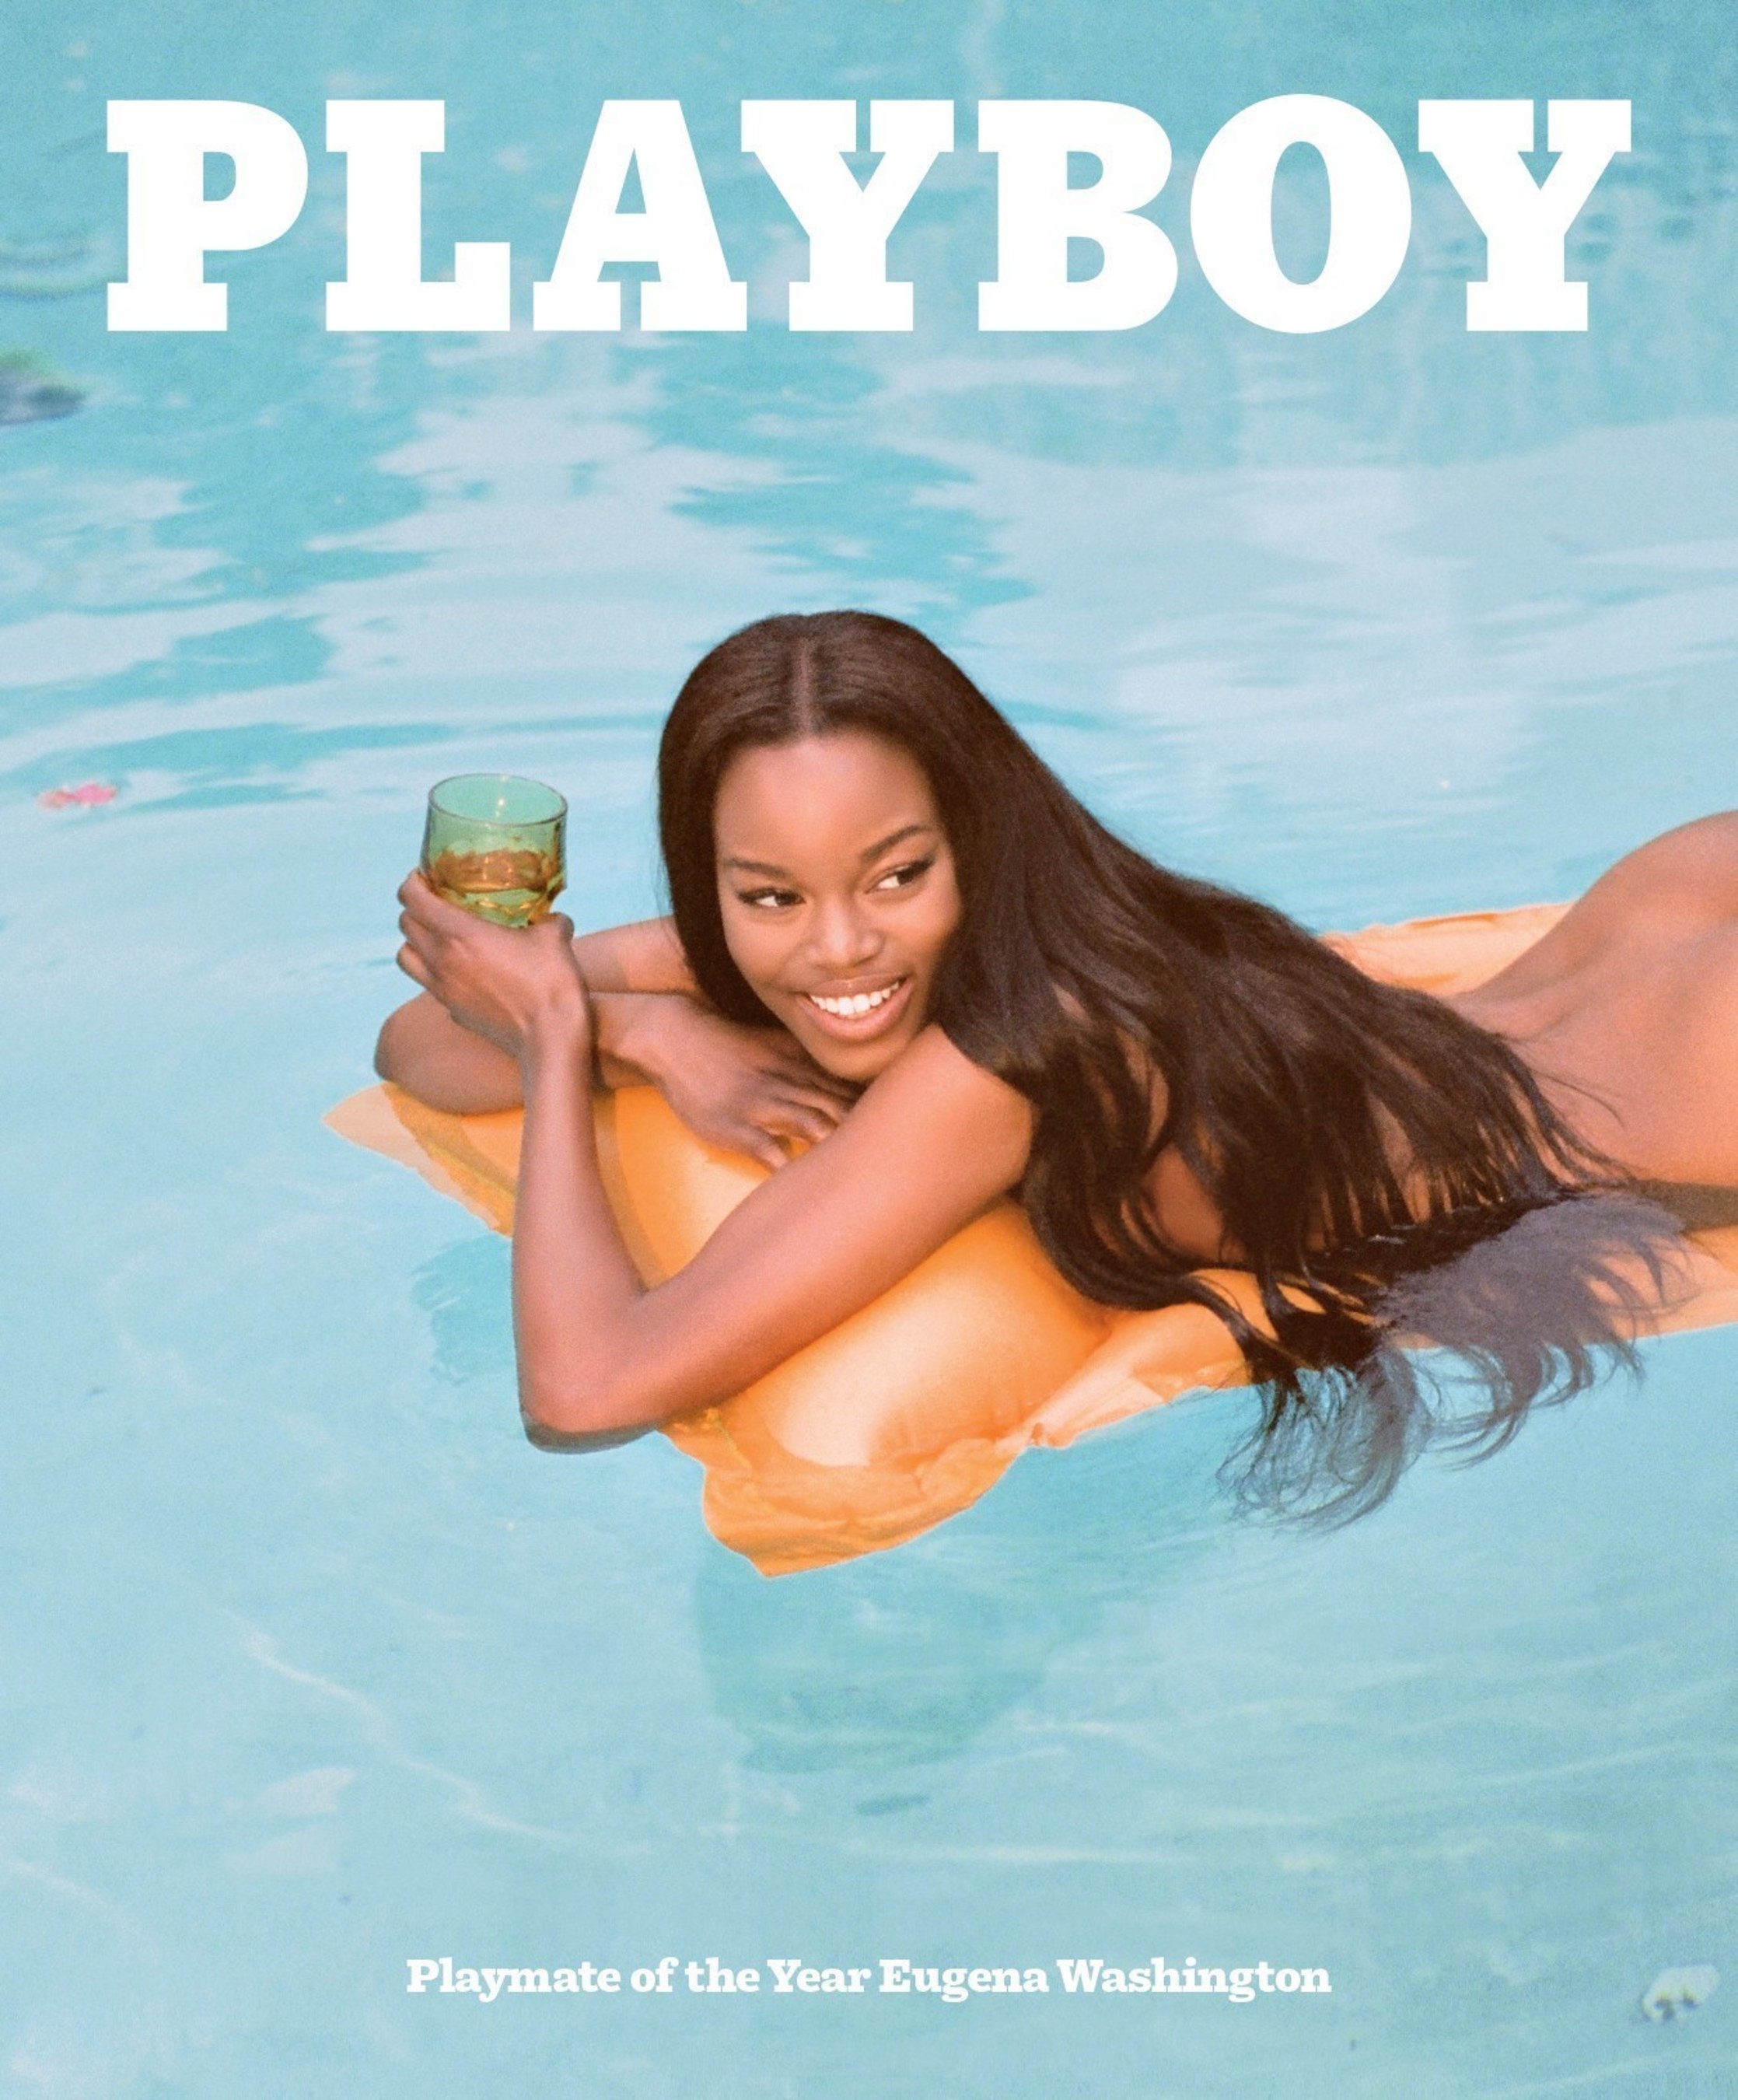 2016 Playmate of the Year Eugena Washington is featured on the cover of Playboy magazine's June 2016 issue.  She was officially introduced on Wednesday, May 11, 2016 at the Playboy Mansion in Holmby Hills, California. (Photo courtesy Playboy/Jason Lee Parry.)